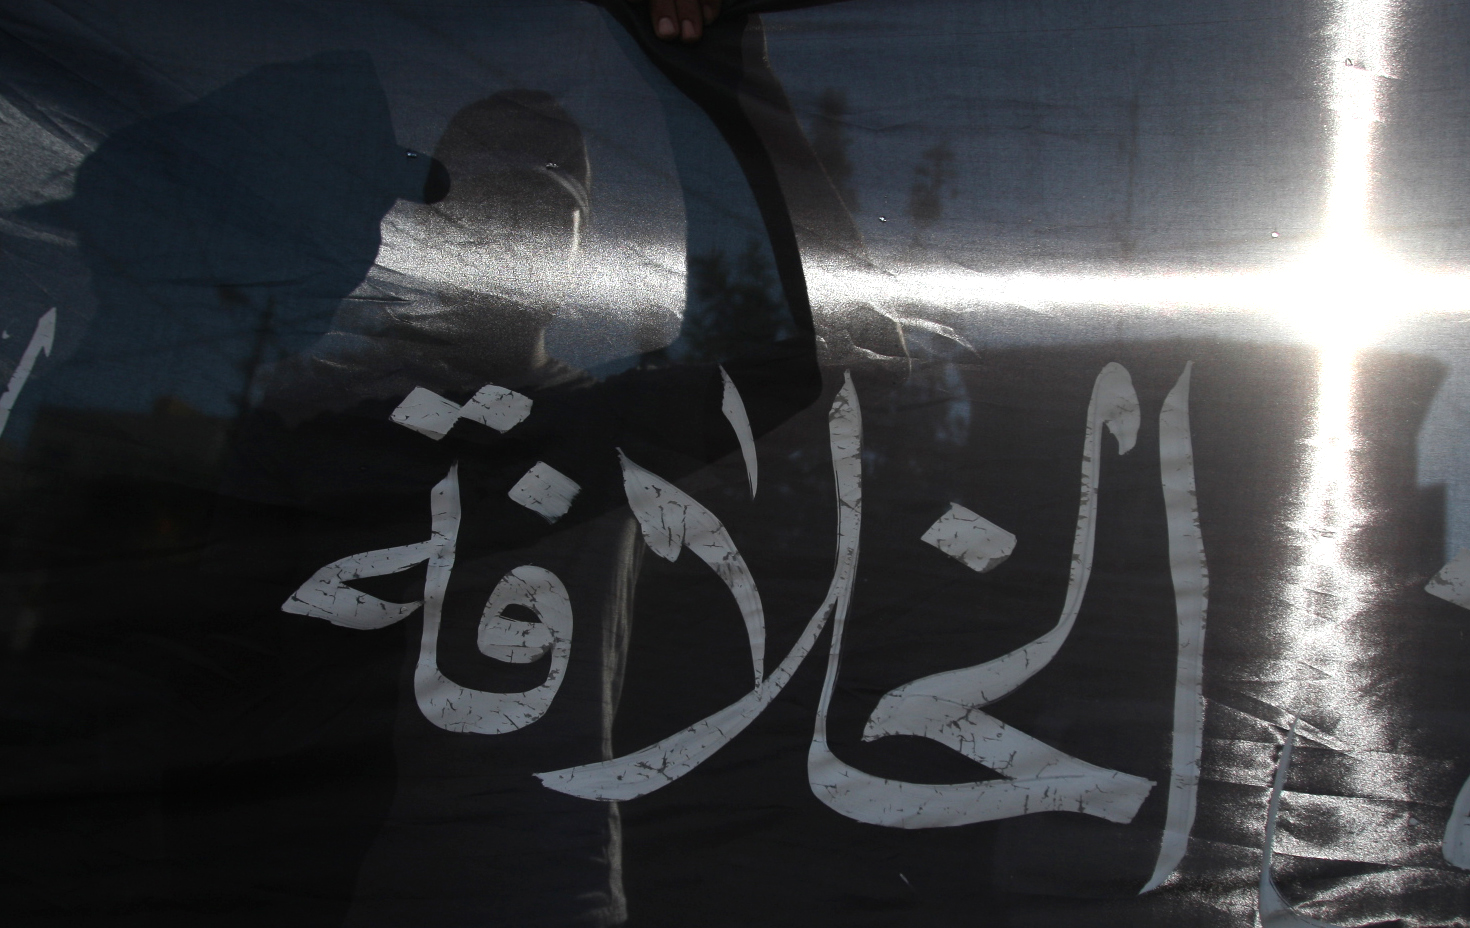 Silhouetted behind the Arabic word "cali